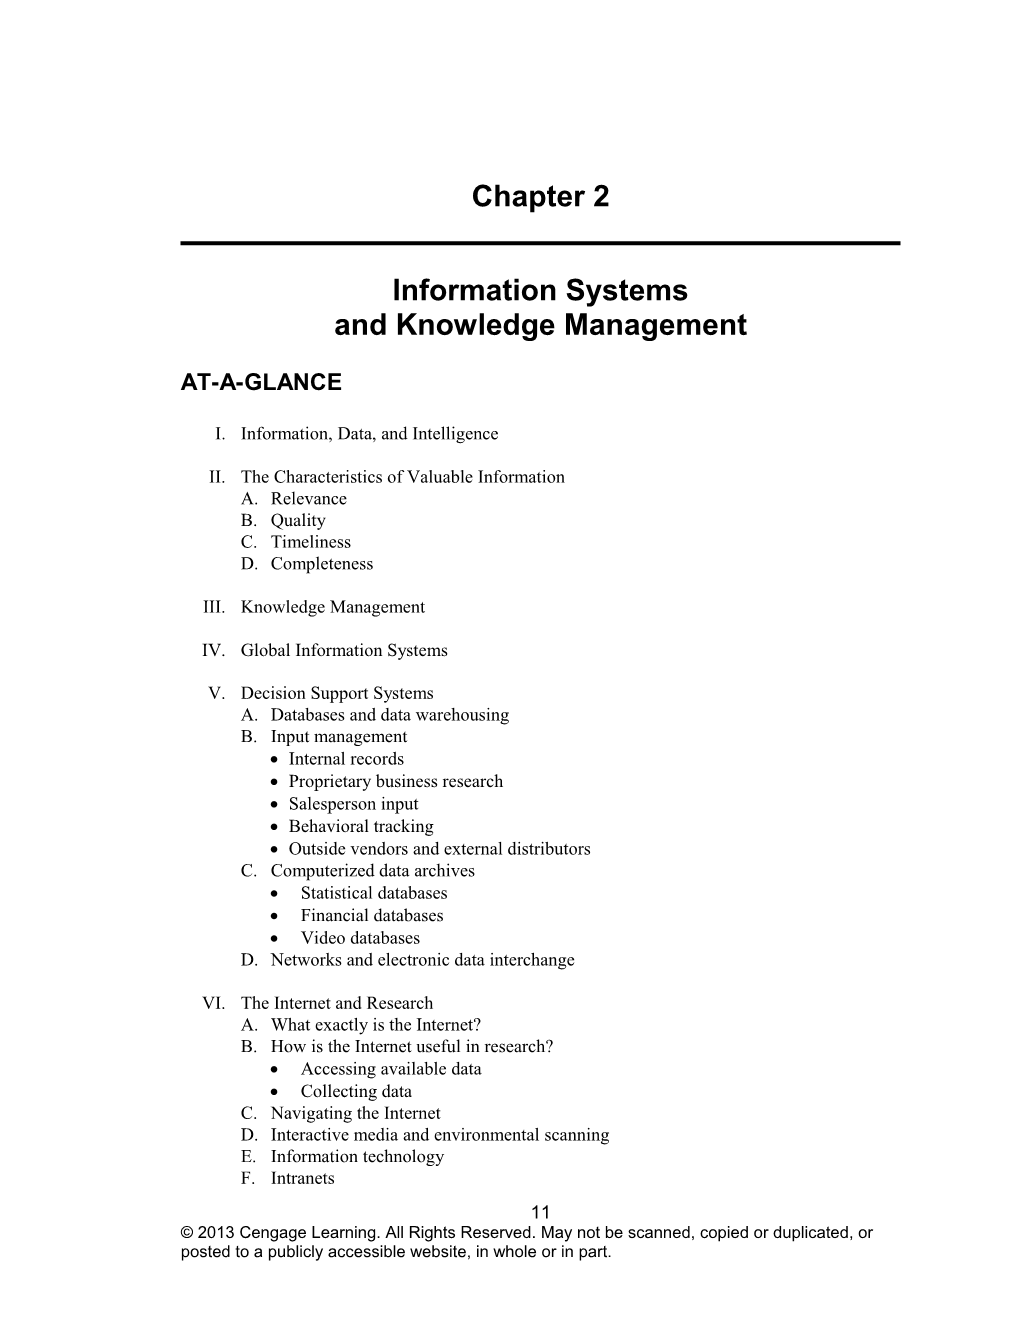 Chapter Two: Information Systems and Knowledge Management 1